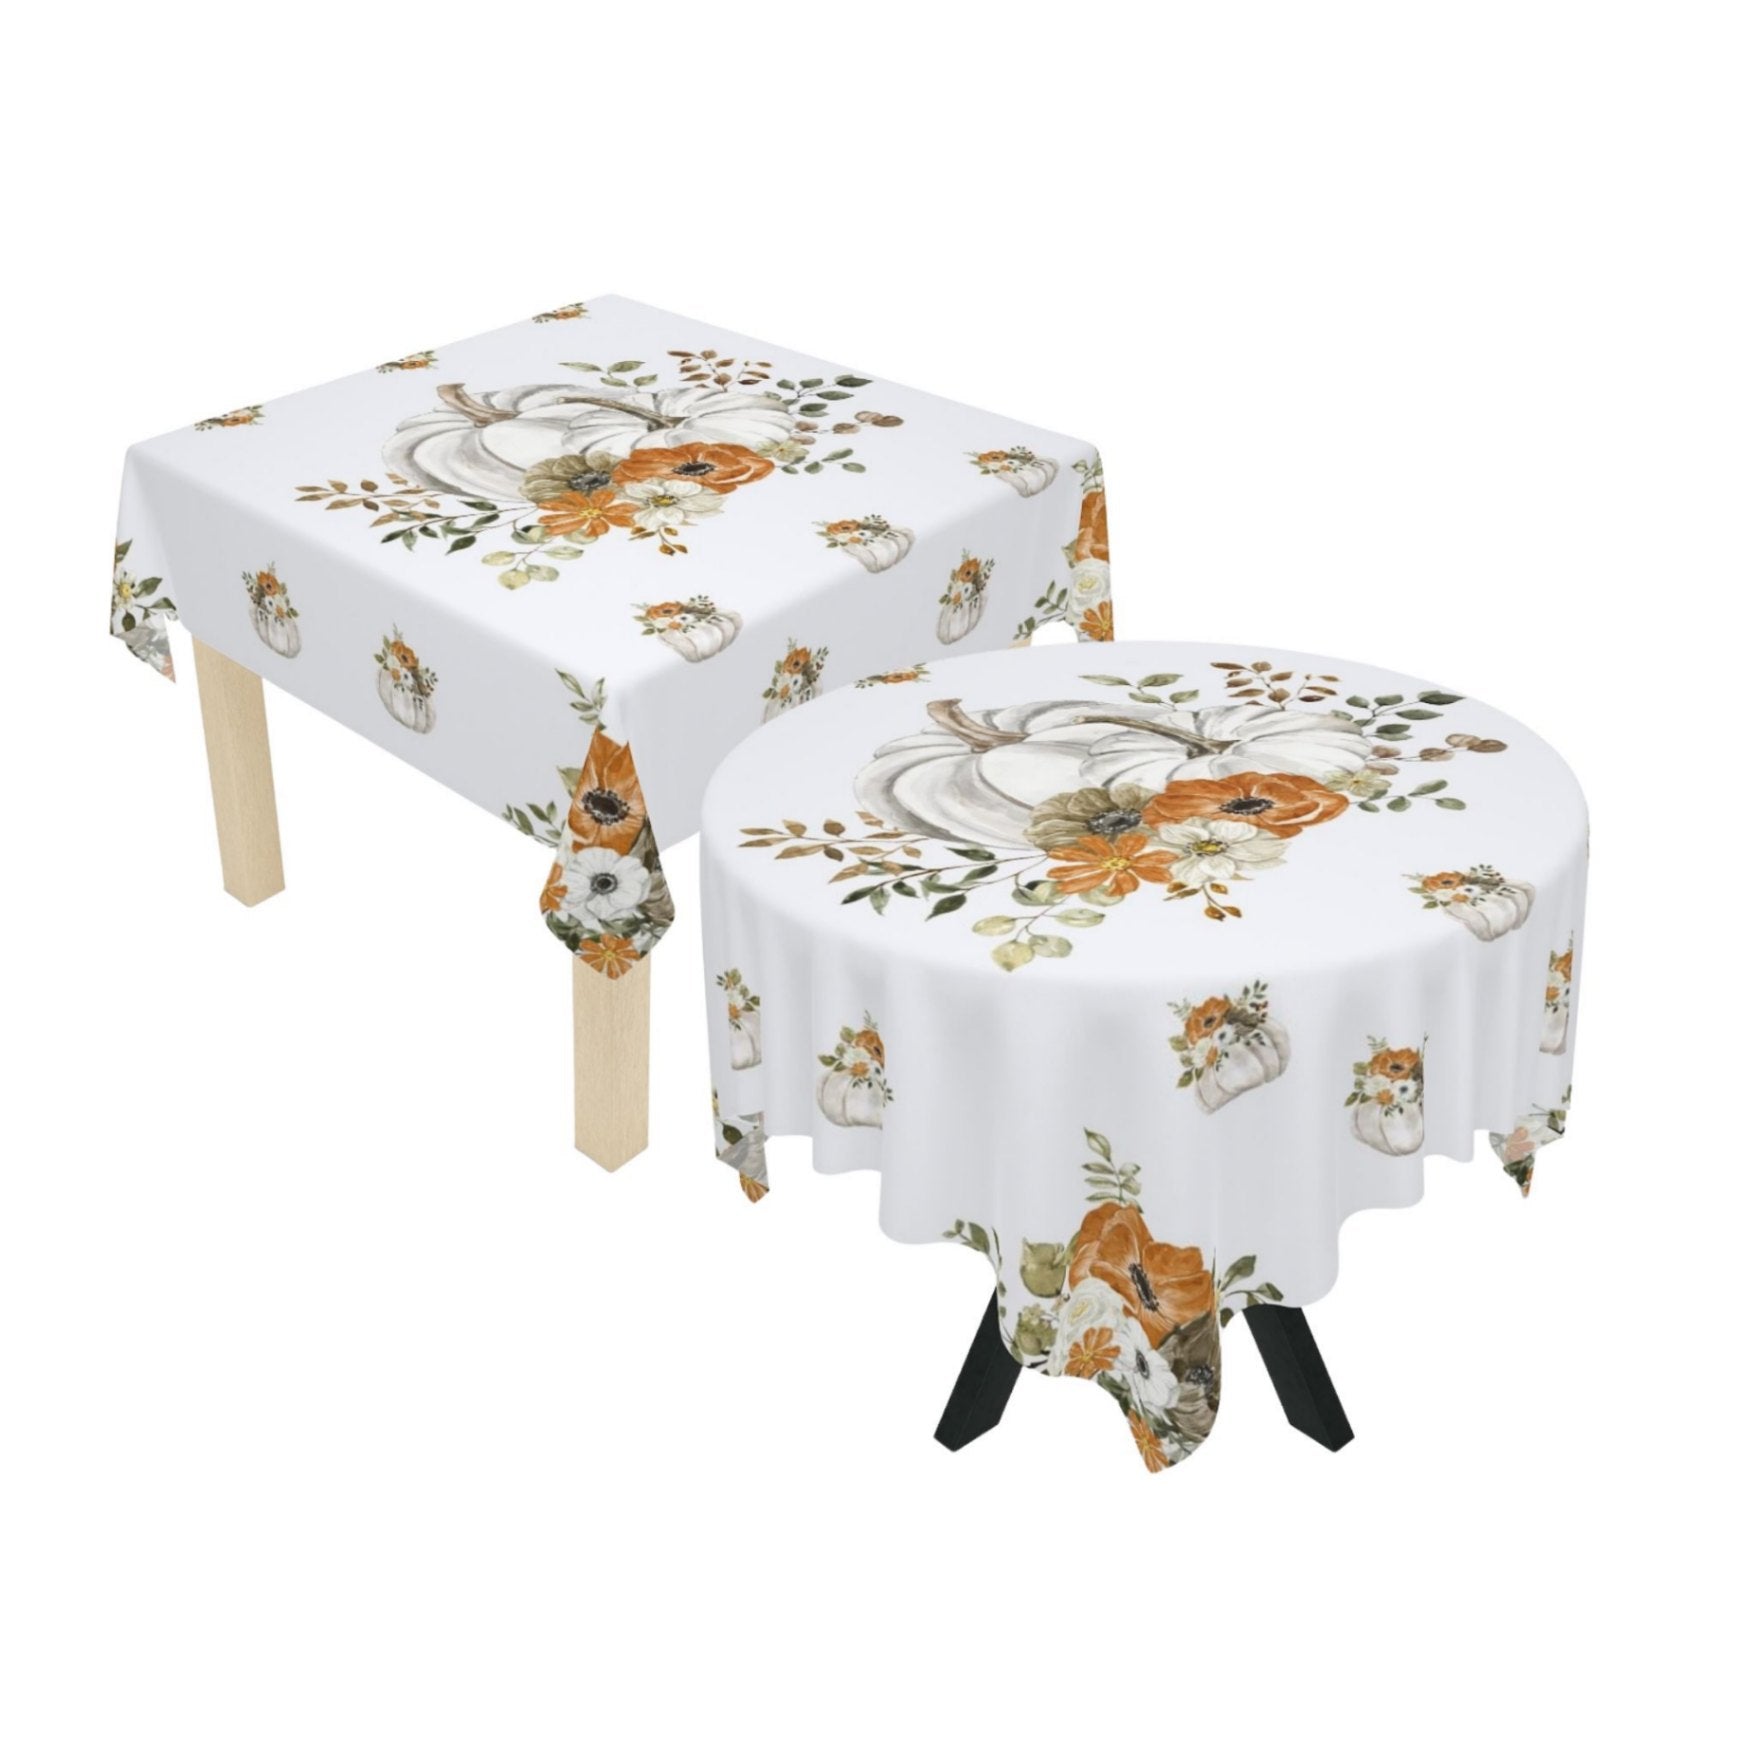 Thanksgiving Harvest Tablecloth - ZumBuys